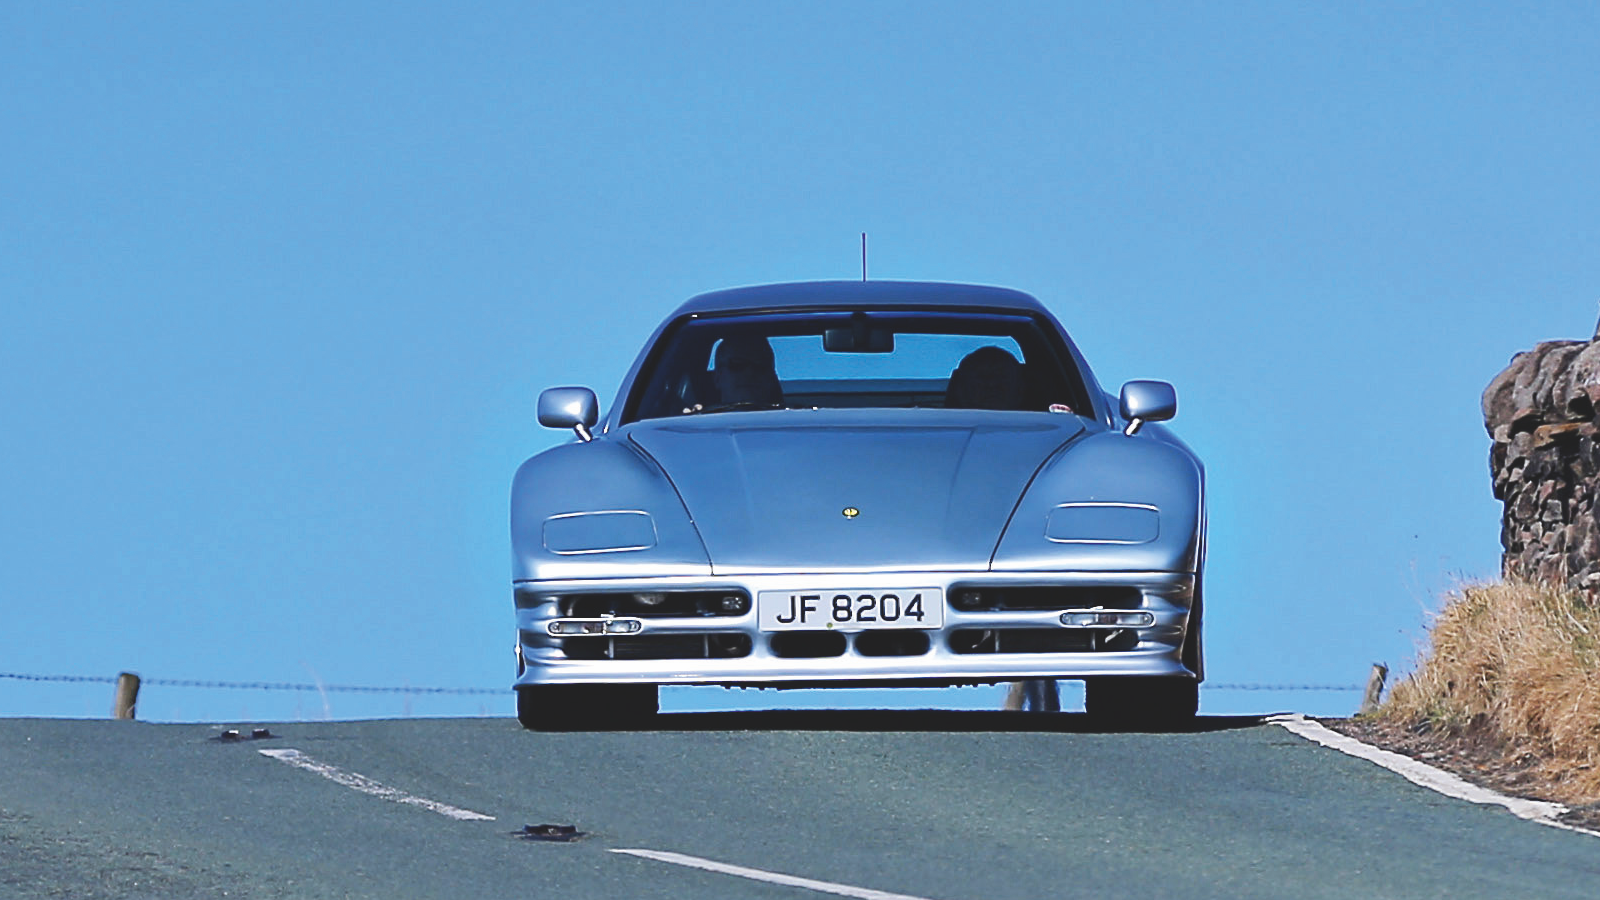 Meet the bonkers British supercar you’ve never heard of